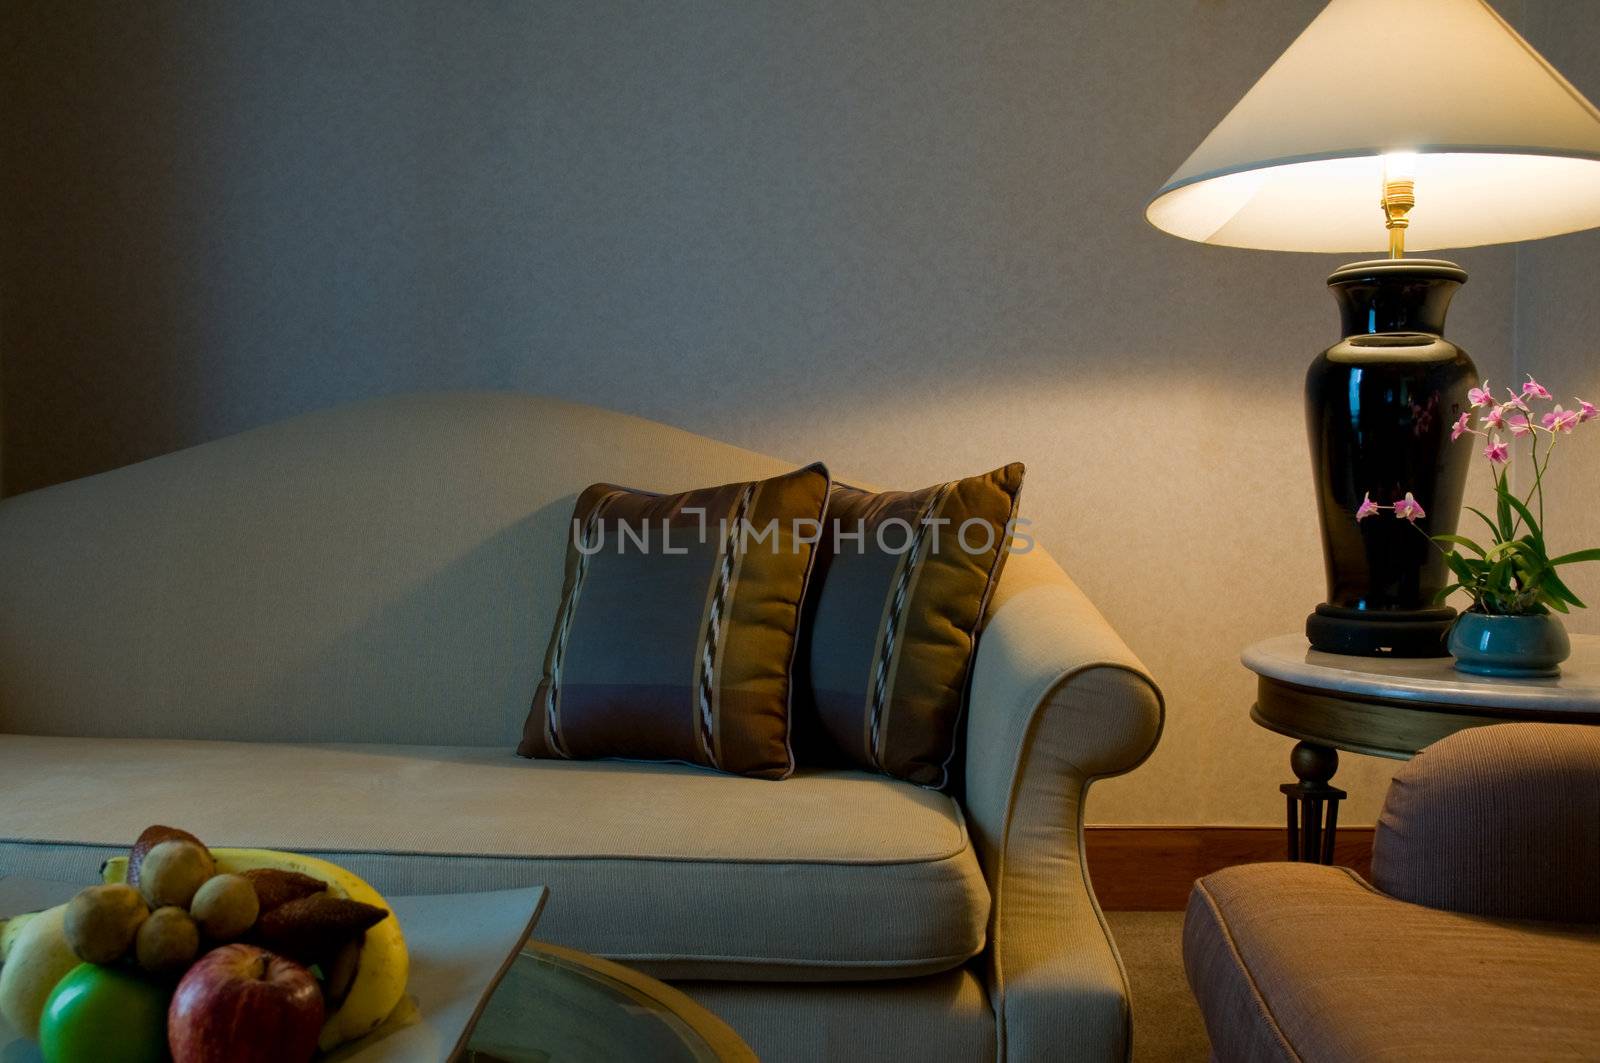 Sitting area of a 5 star luxury hotel suite room by 3523Studio